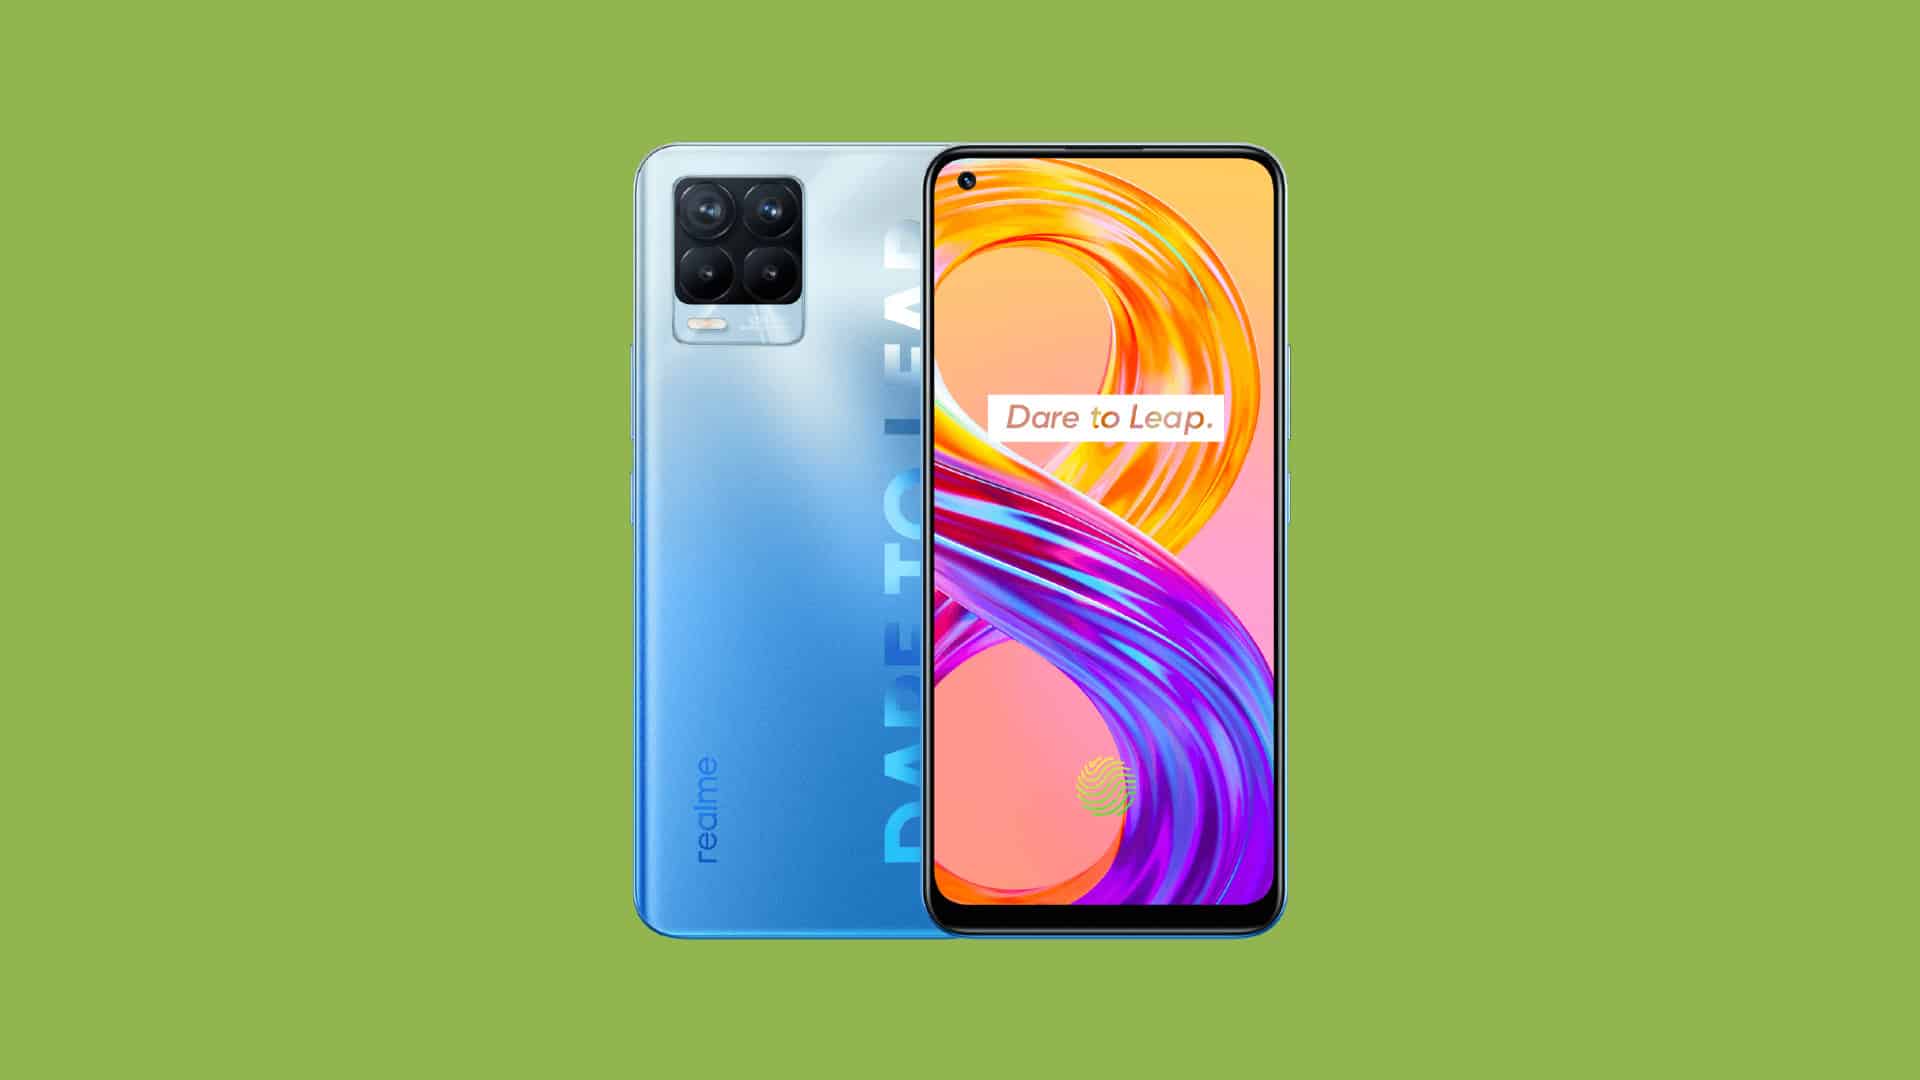 RMX3081 11 A 33   Realme 8 Pro May 2021 security patch update - 28